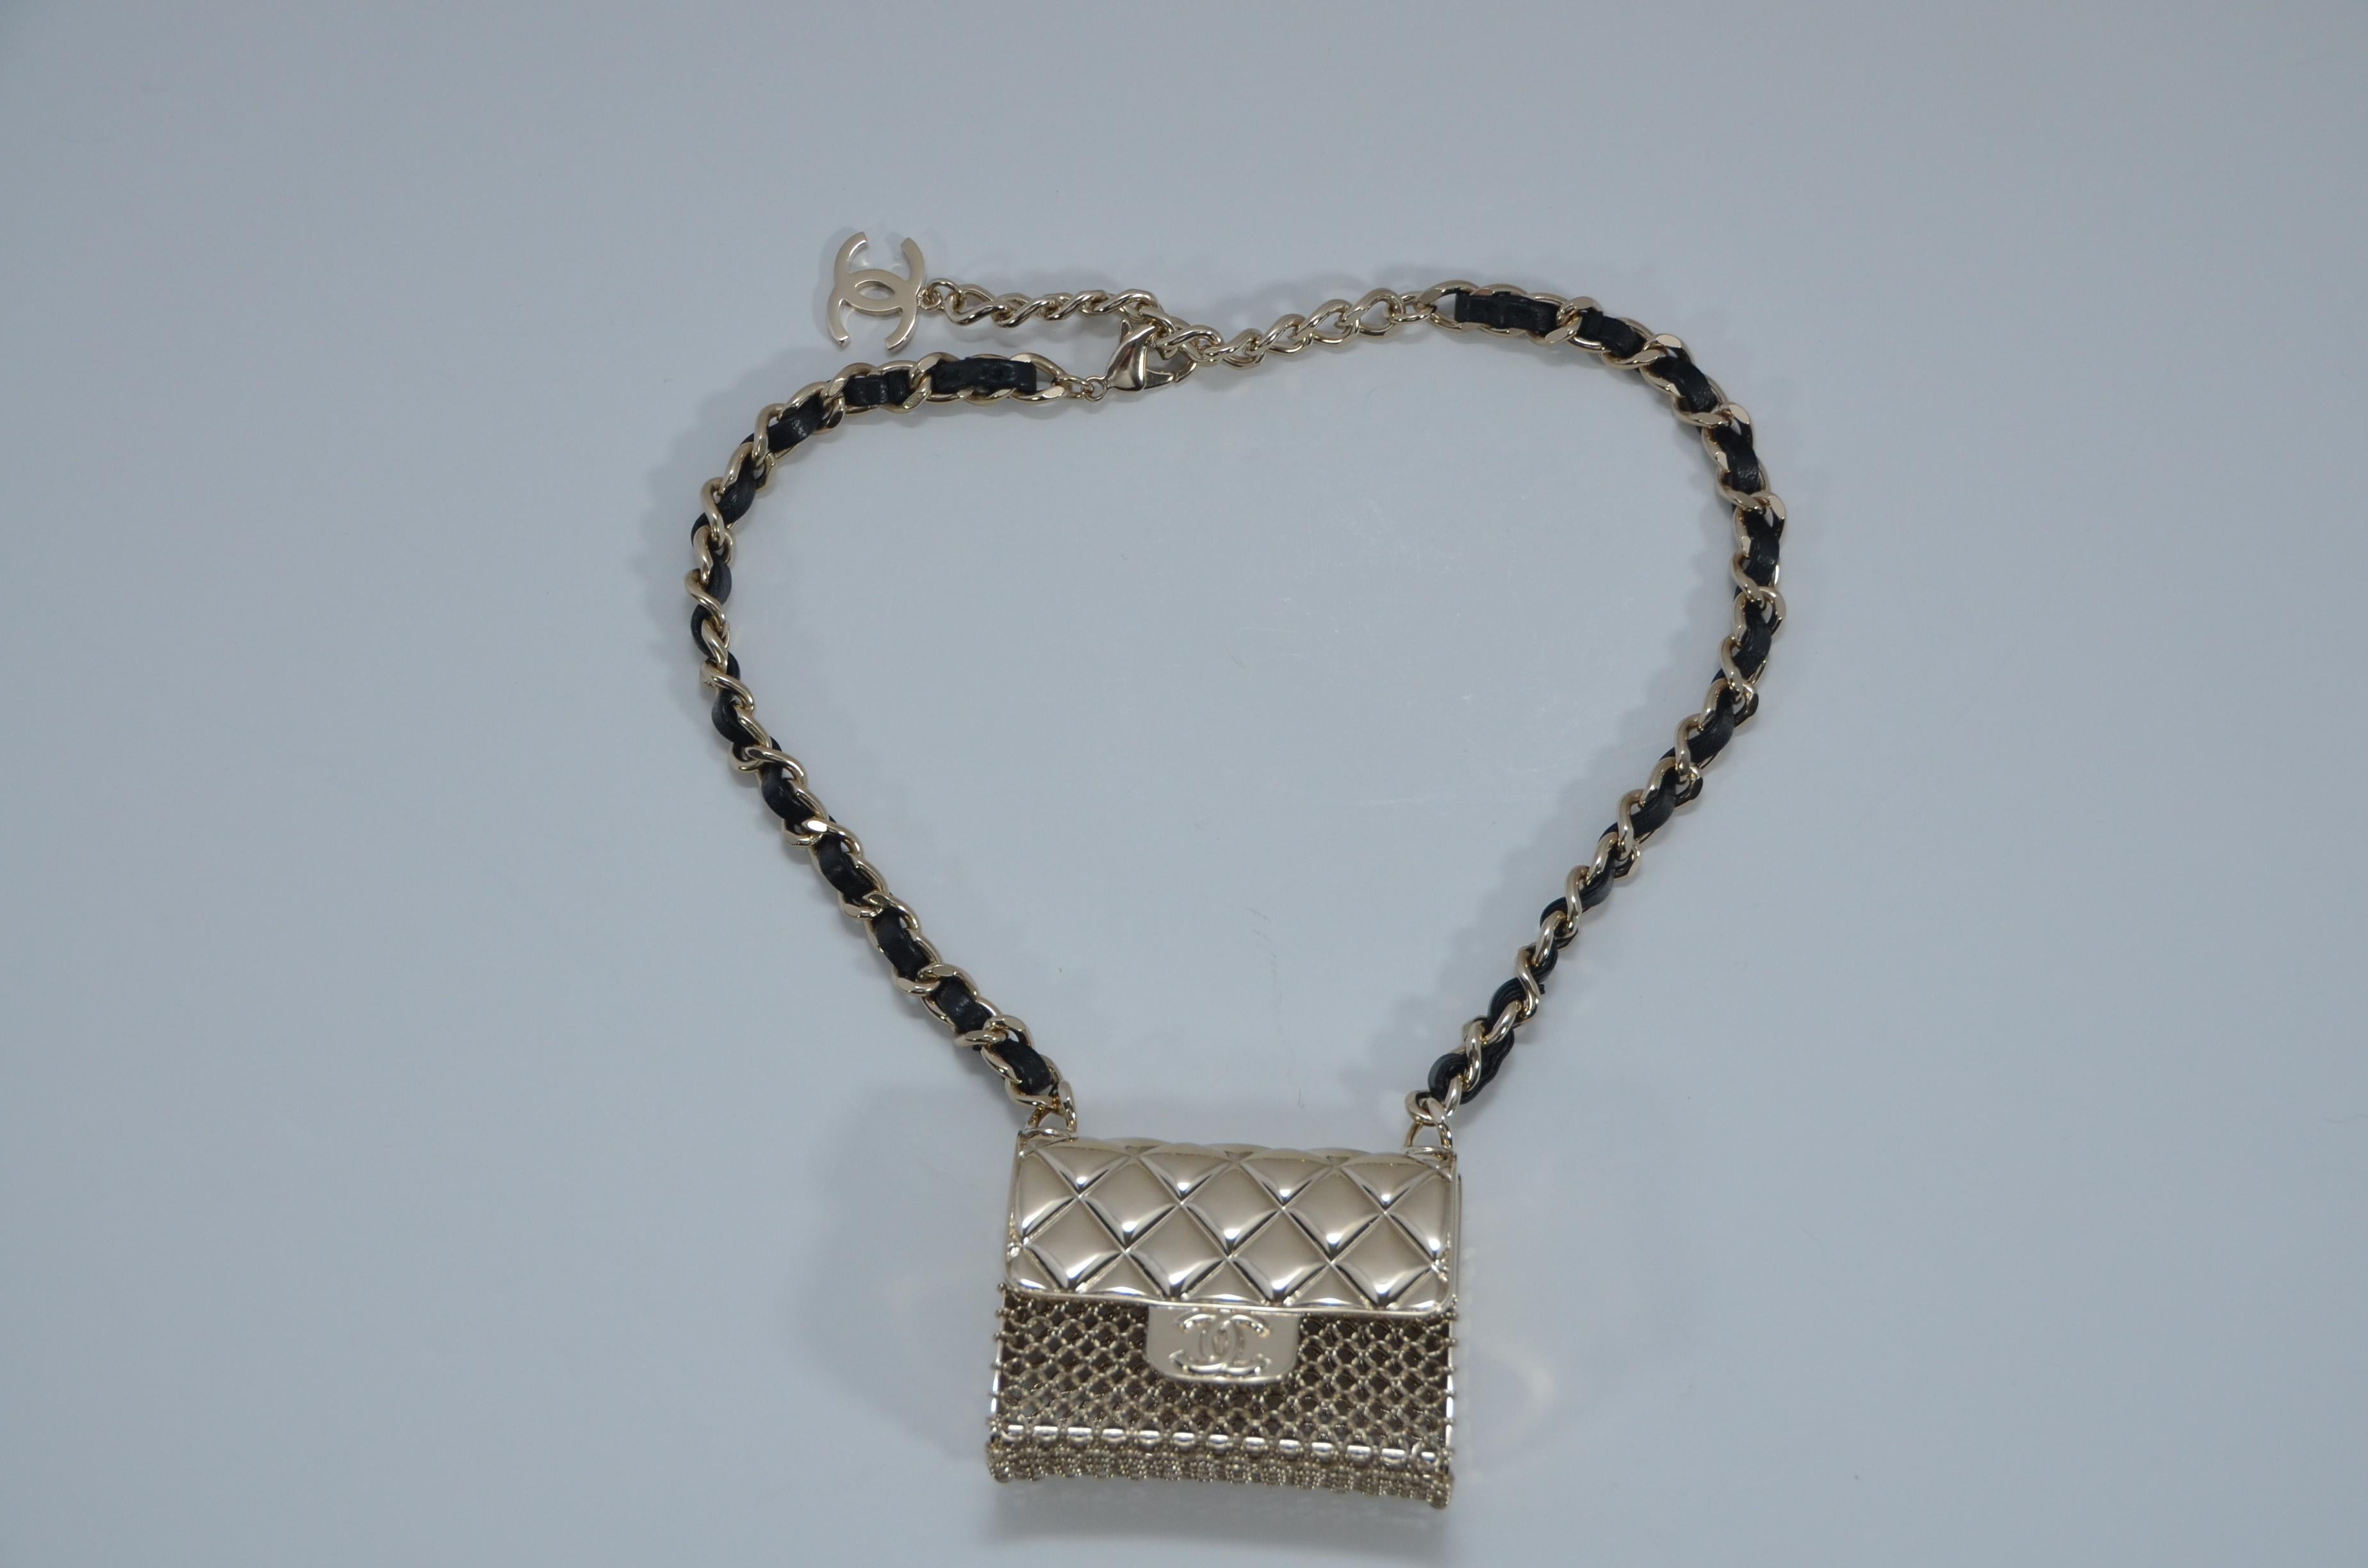 100% AUTHENTIC Chanel mini handbag necklace 
Original receipt with personal info covered will be sent upon request .
Gold tone metal hardware with lambskin woven leather 
Mini purse is  chunky  functional and can be opened 
New with tags and